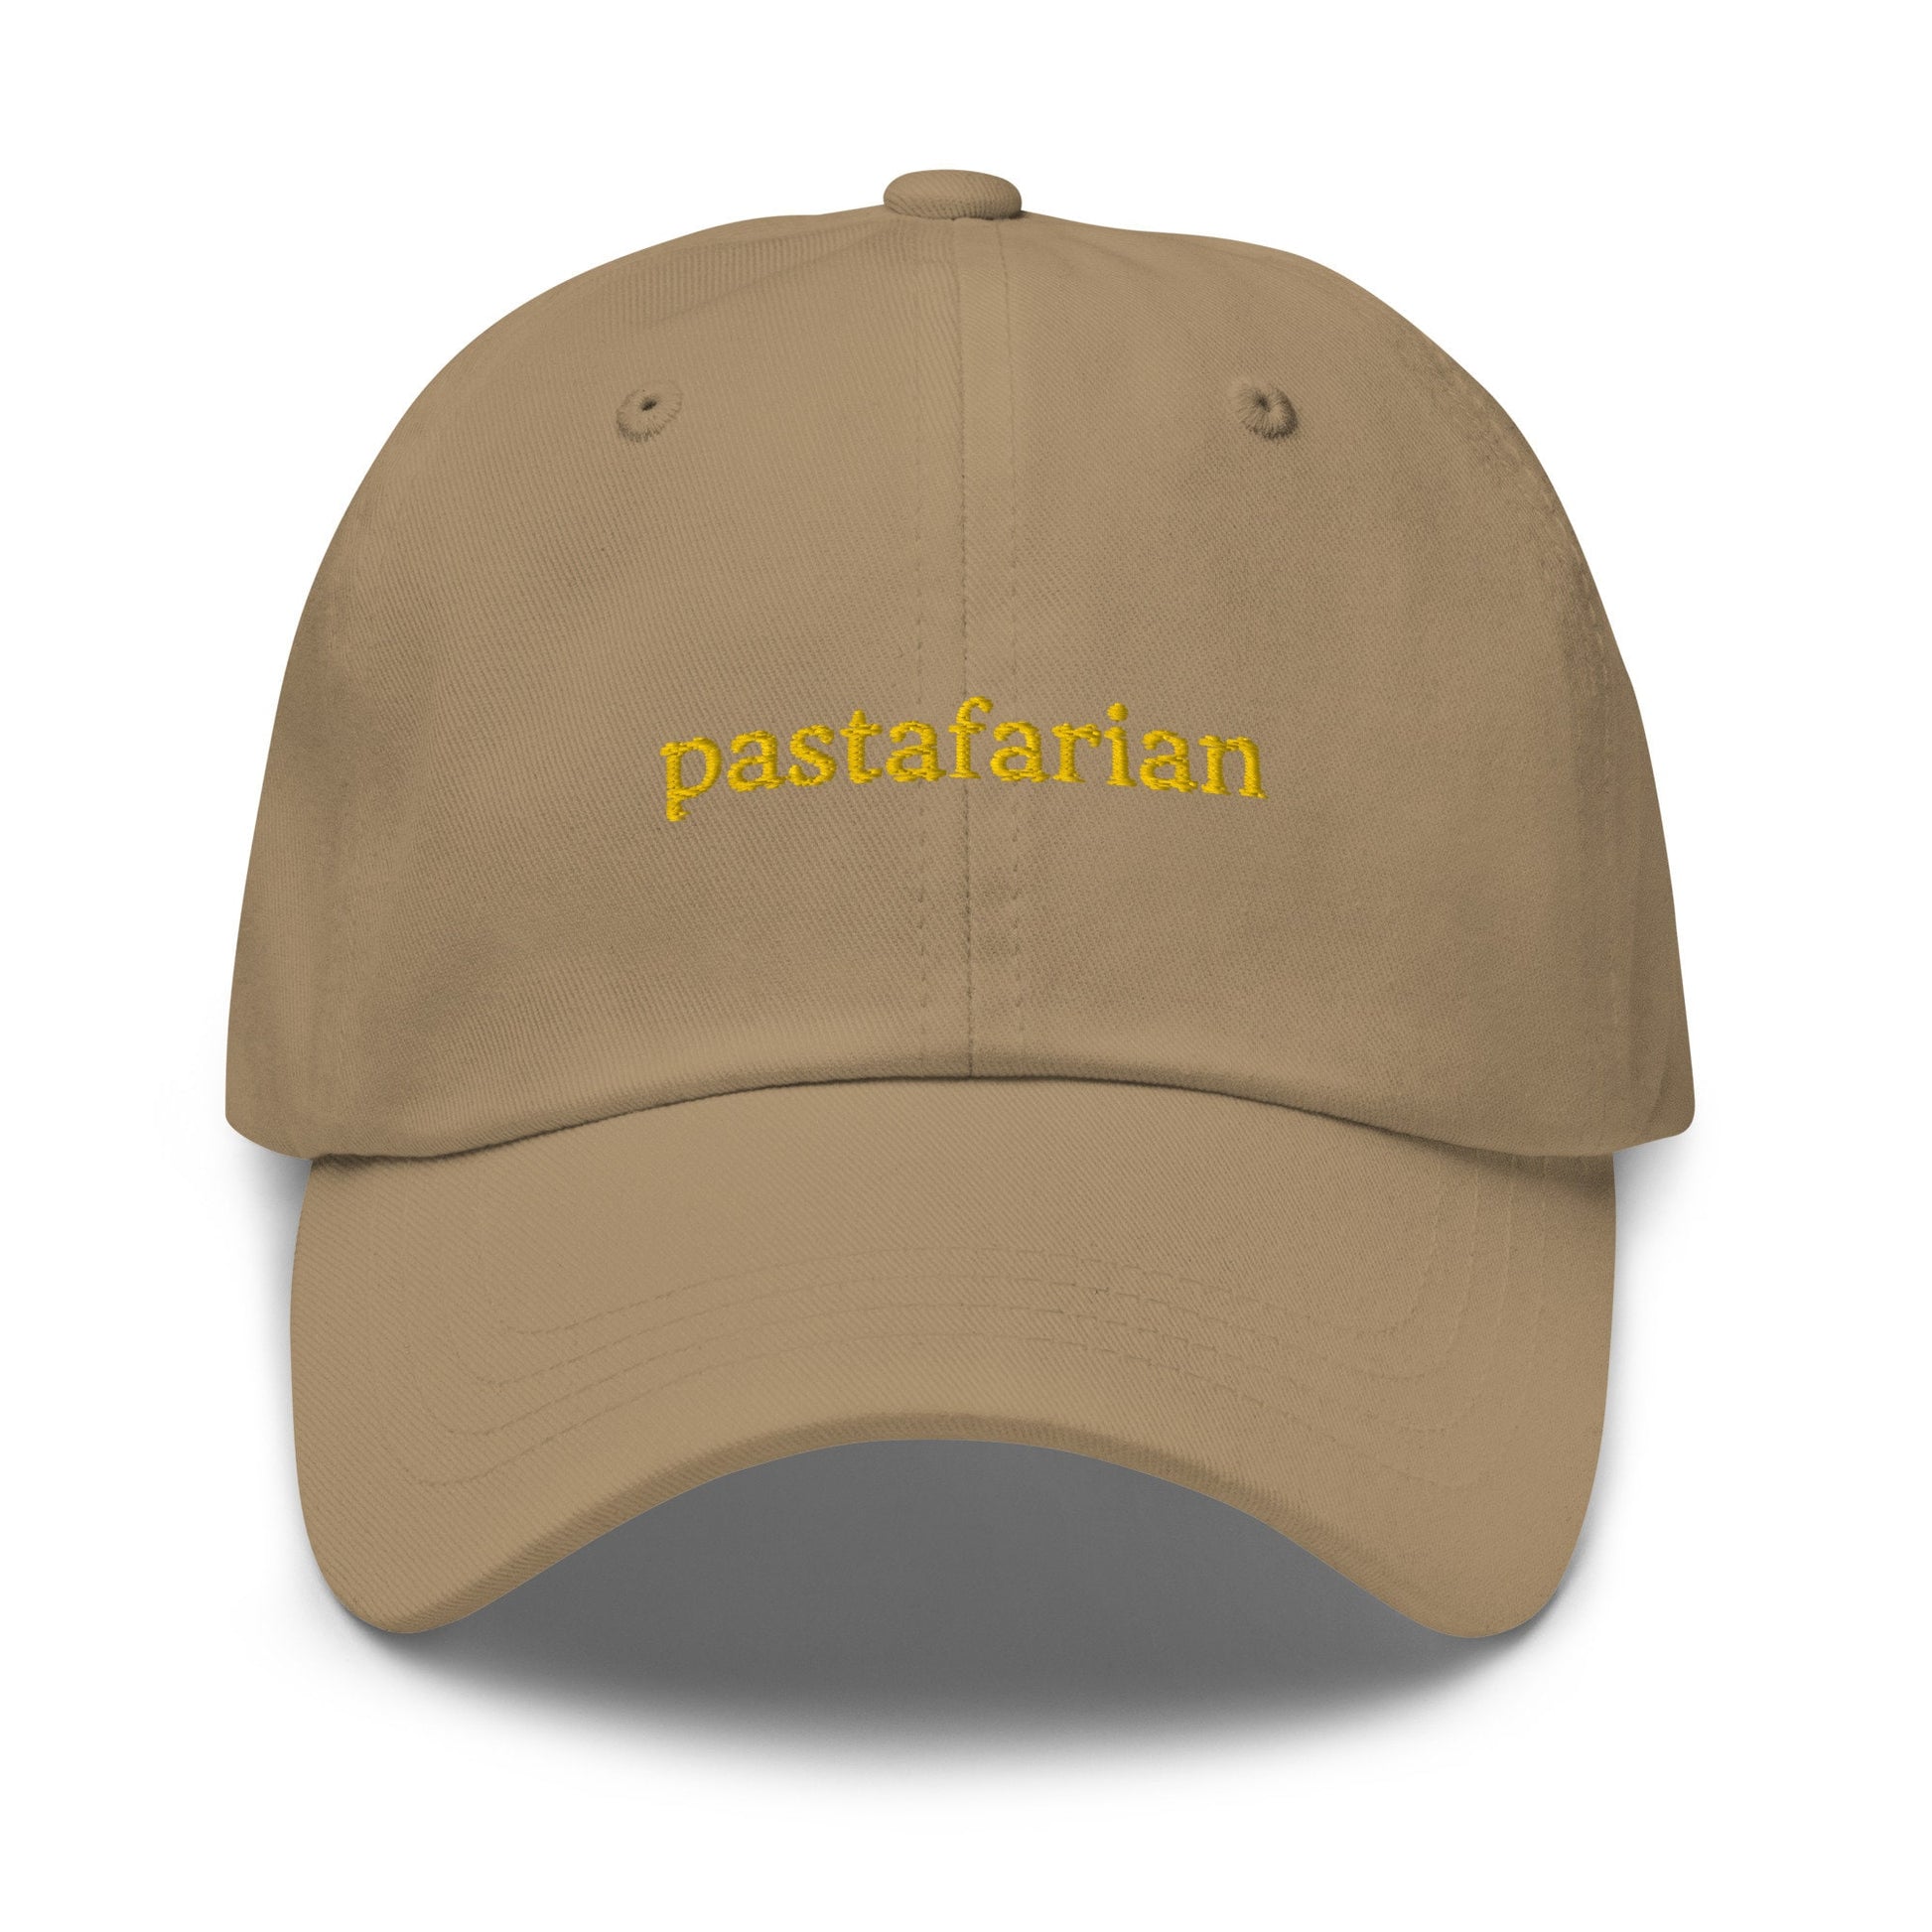 Pasta Worship Dad Hat - Pastafarian - Home Chefs - Foodies - Italian Food Lovers - Cotton Embroidered Cap - Multiple Colors